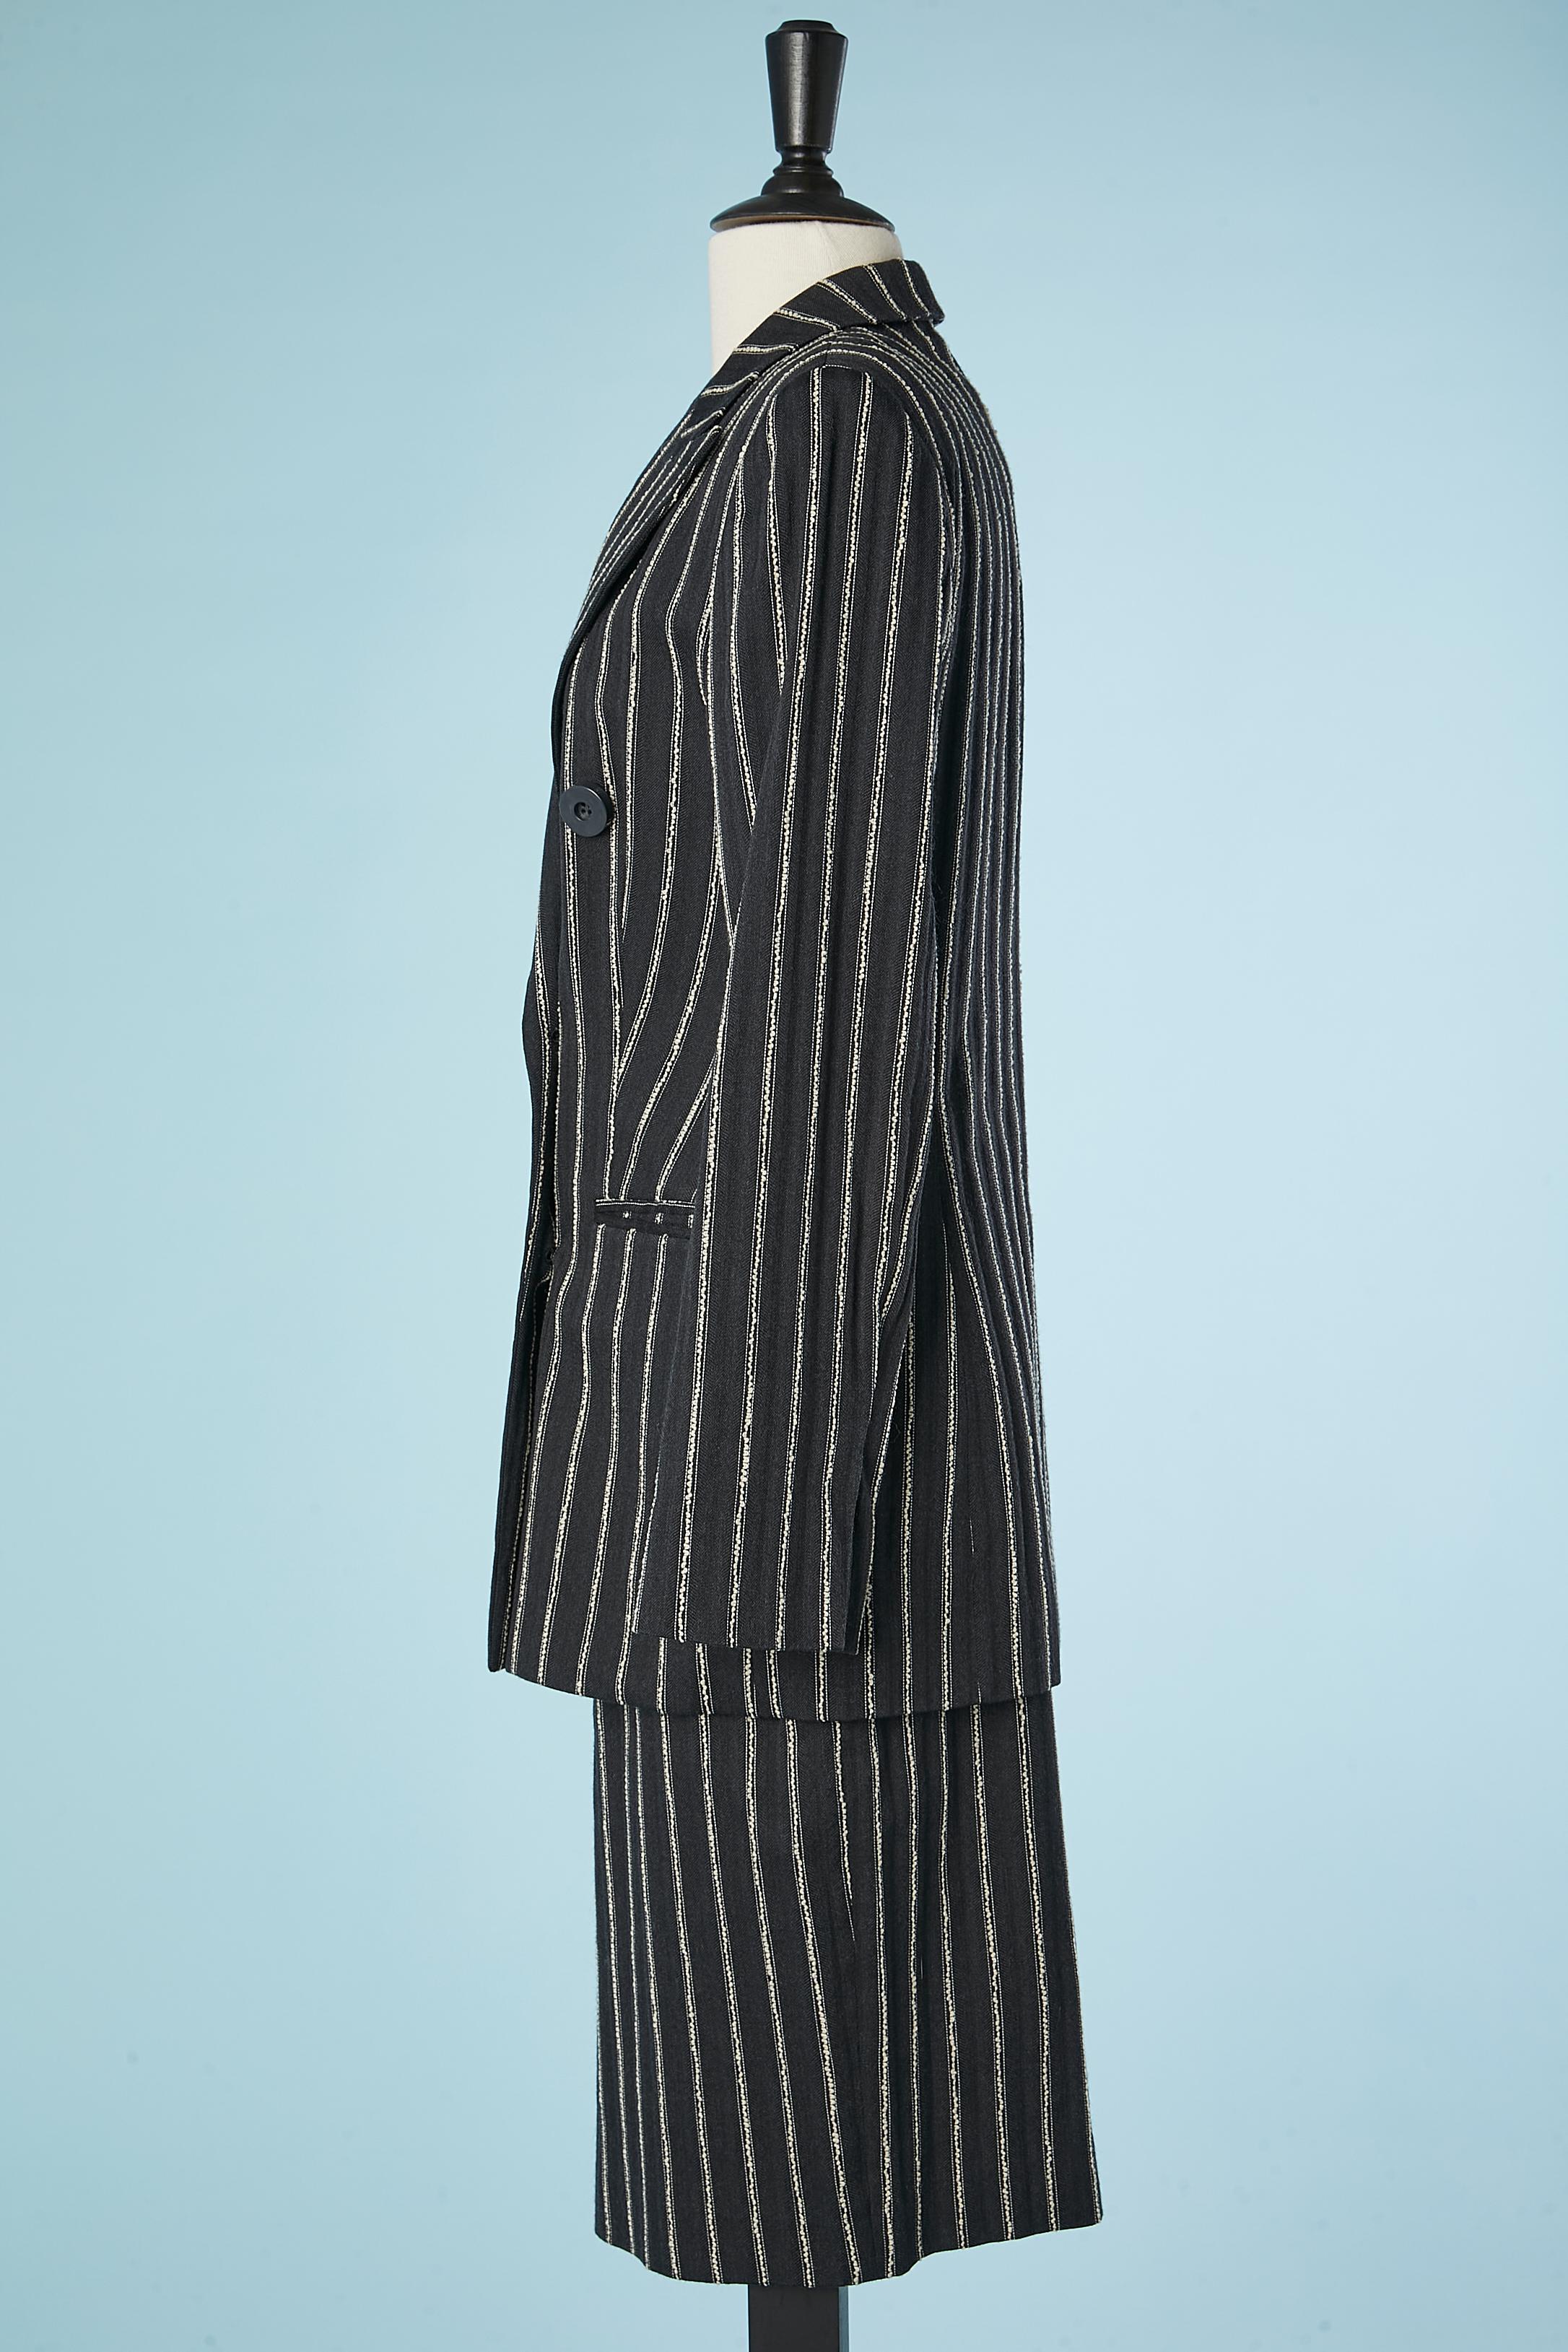 Anthracite striped wool and cotton double-breasted skirt suit Studio Ferré  In Excellent Condition For Sale In Saint-Ouen-Sur-Seine, FR